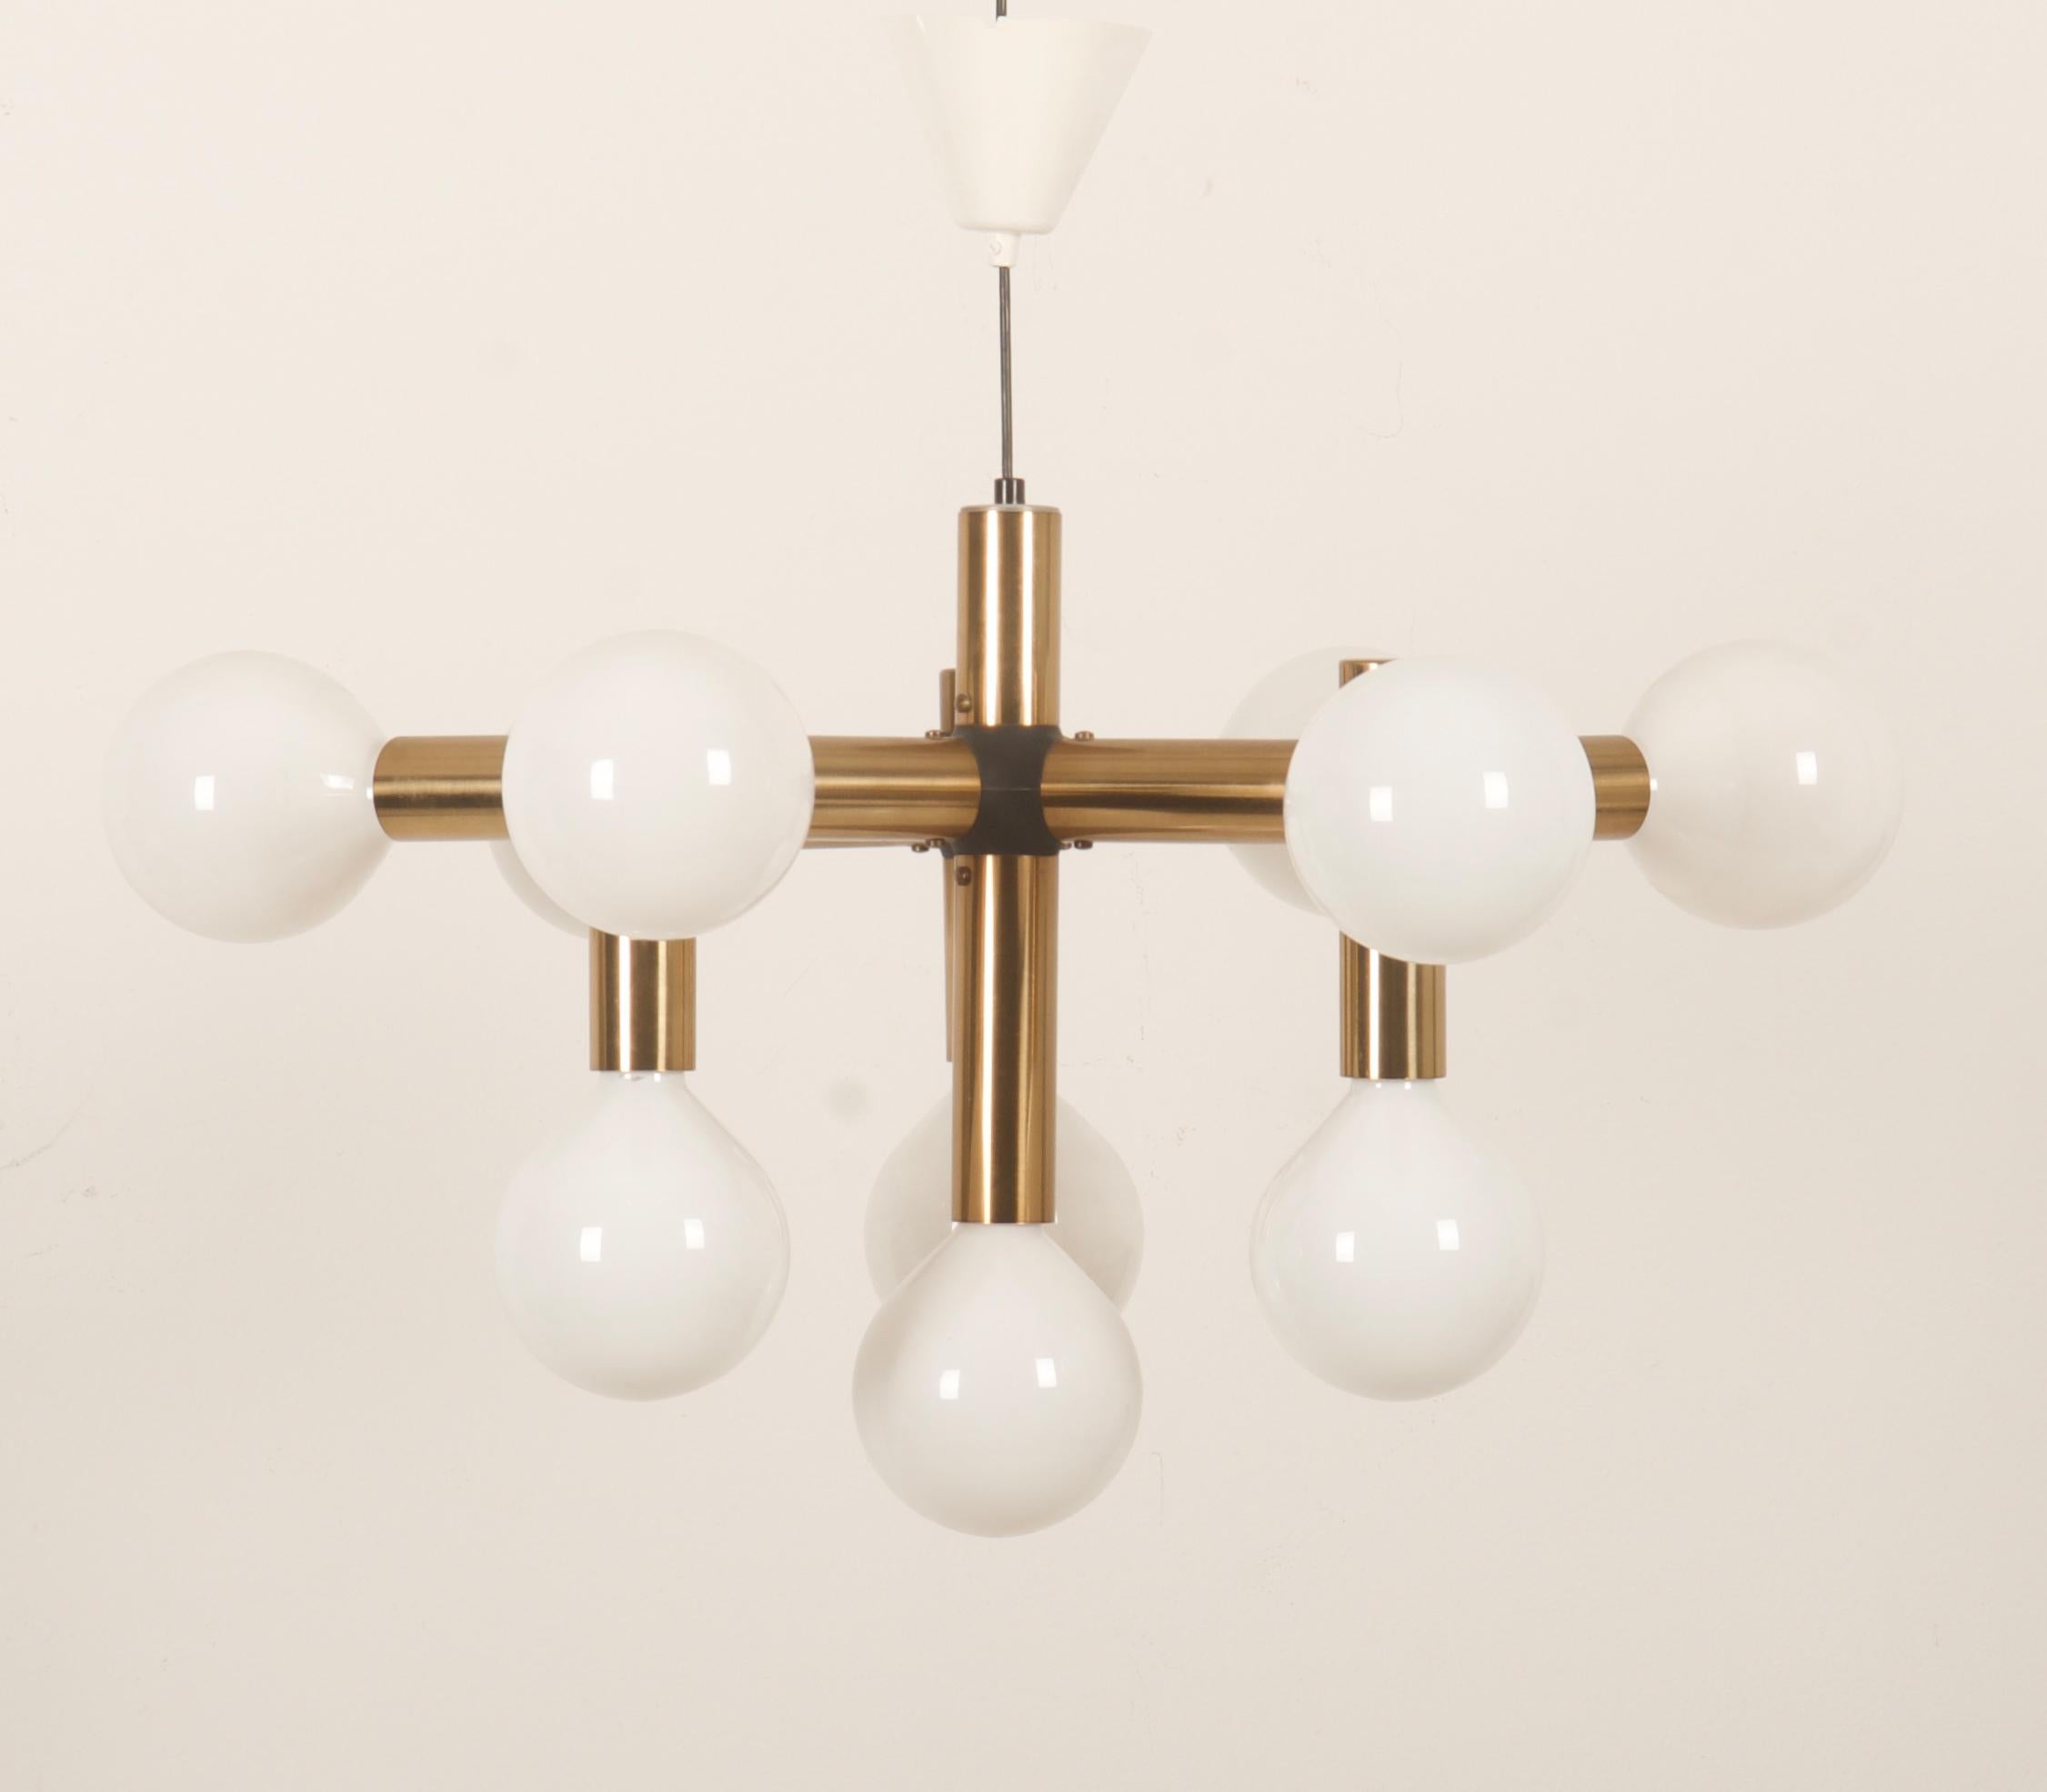 Late 20th Century Atomic Chnadelier by Trix & Robert Haussmann For Swiss Lamp International For Sale